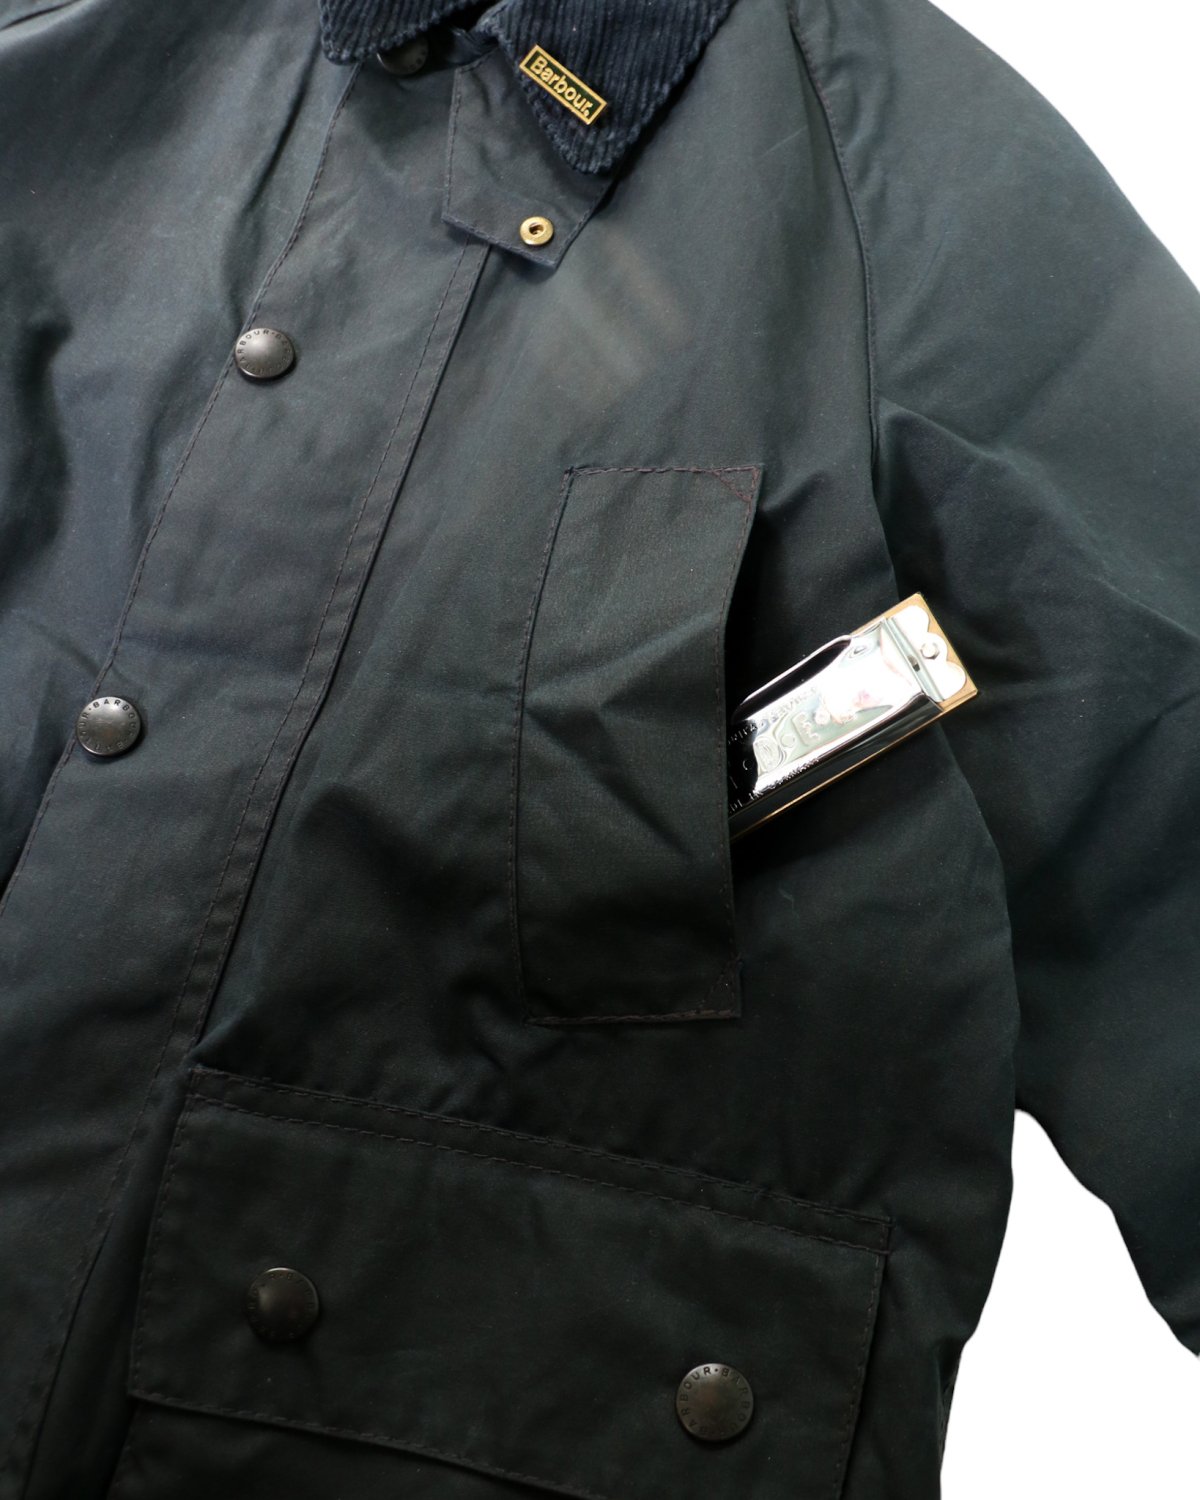 I&I 古着 通販 “Barbour” BEDALE 詳細画像7